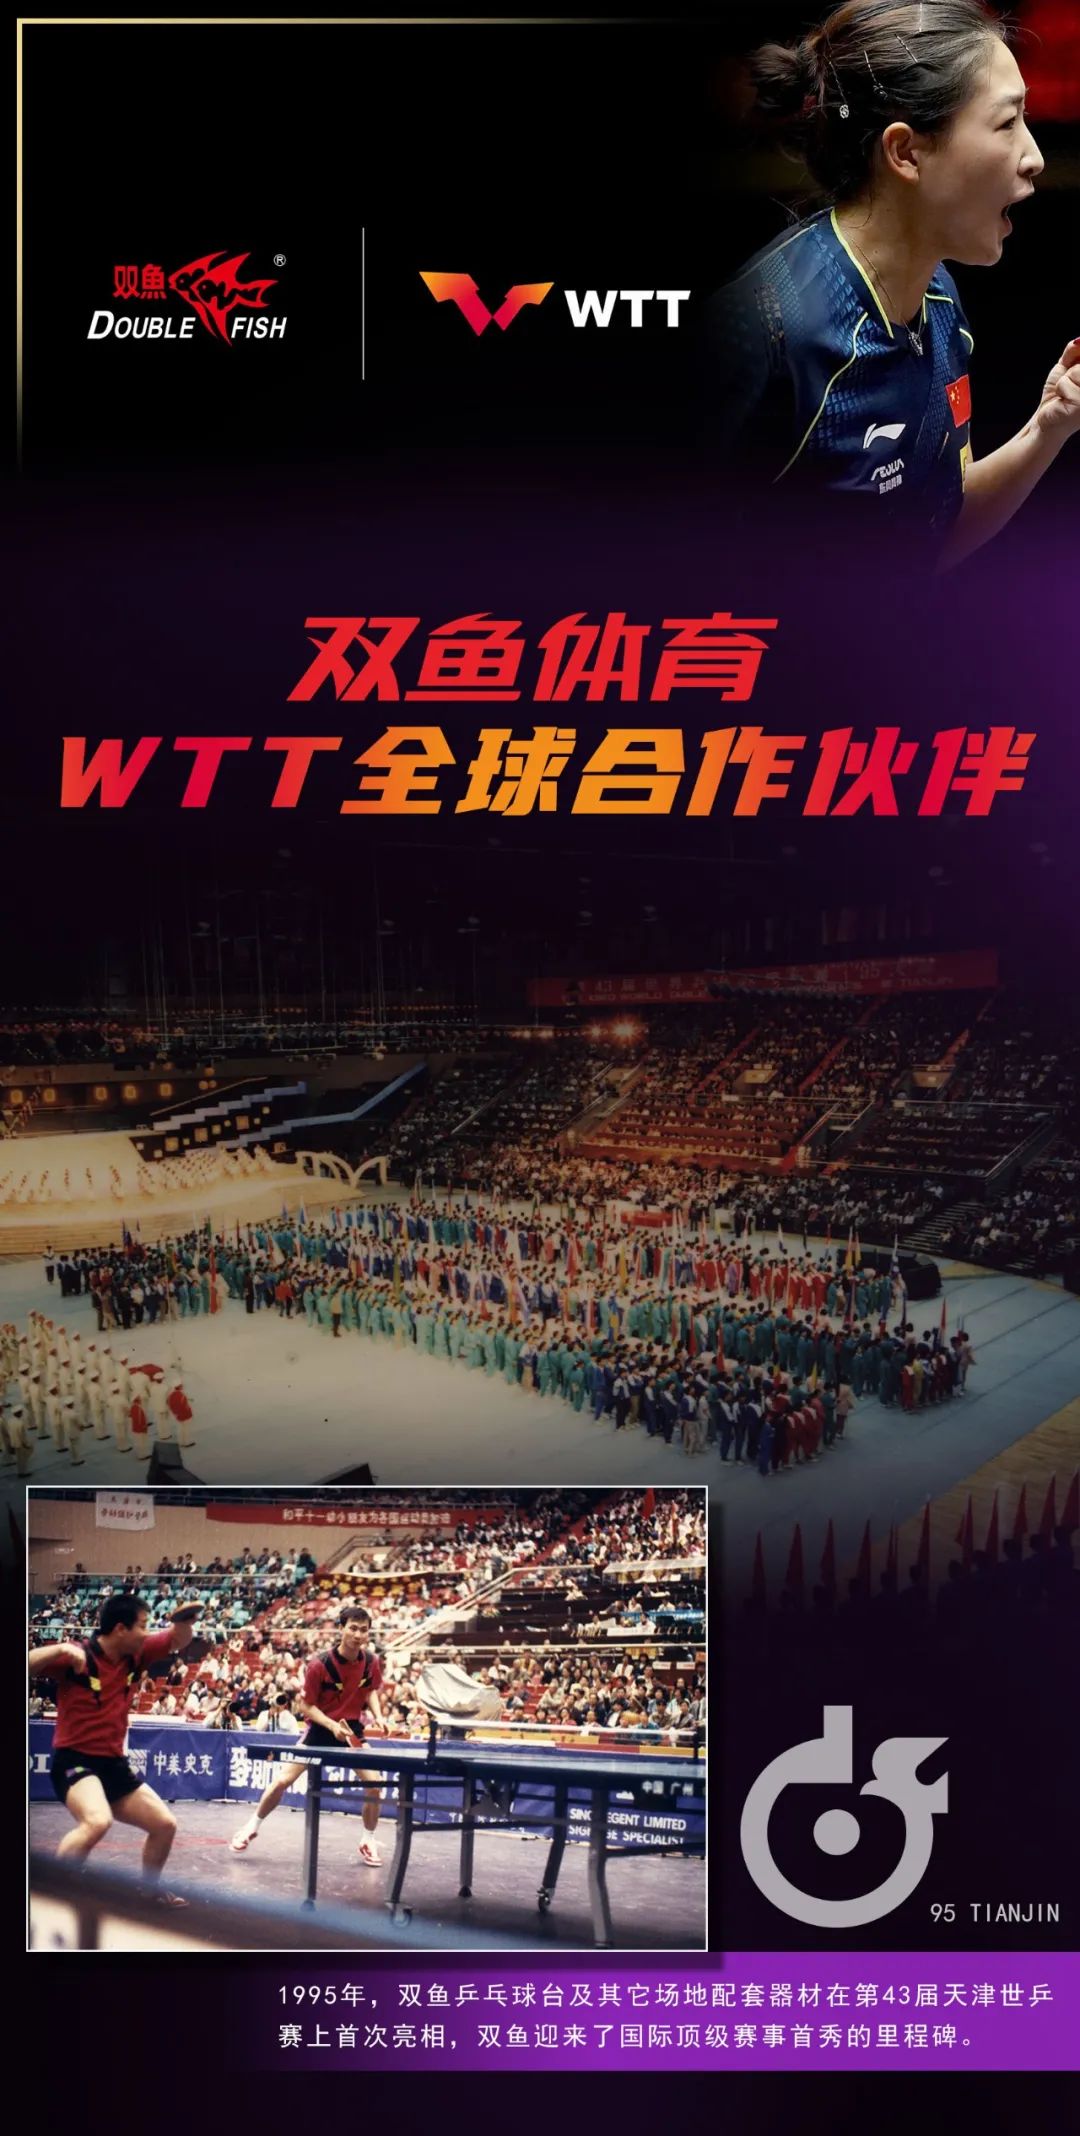 Double fish sports become the WTT Global partner for 2022-2023